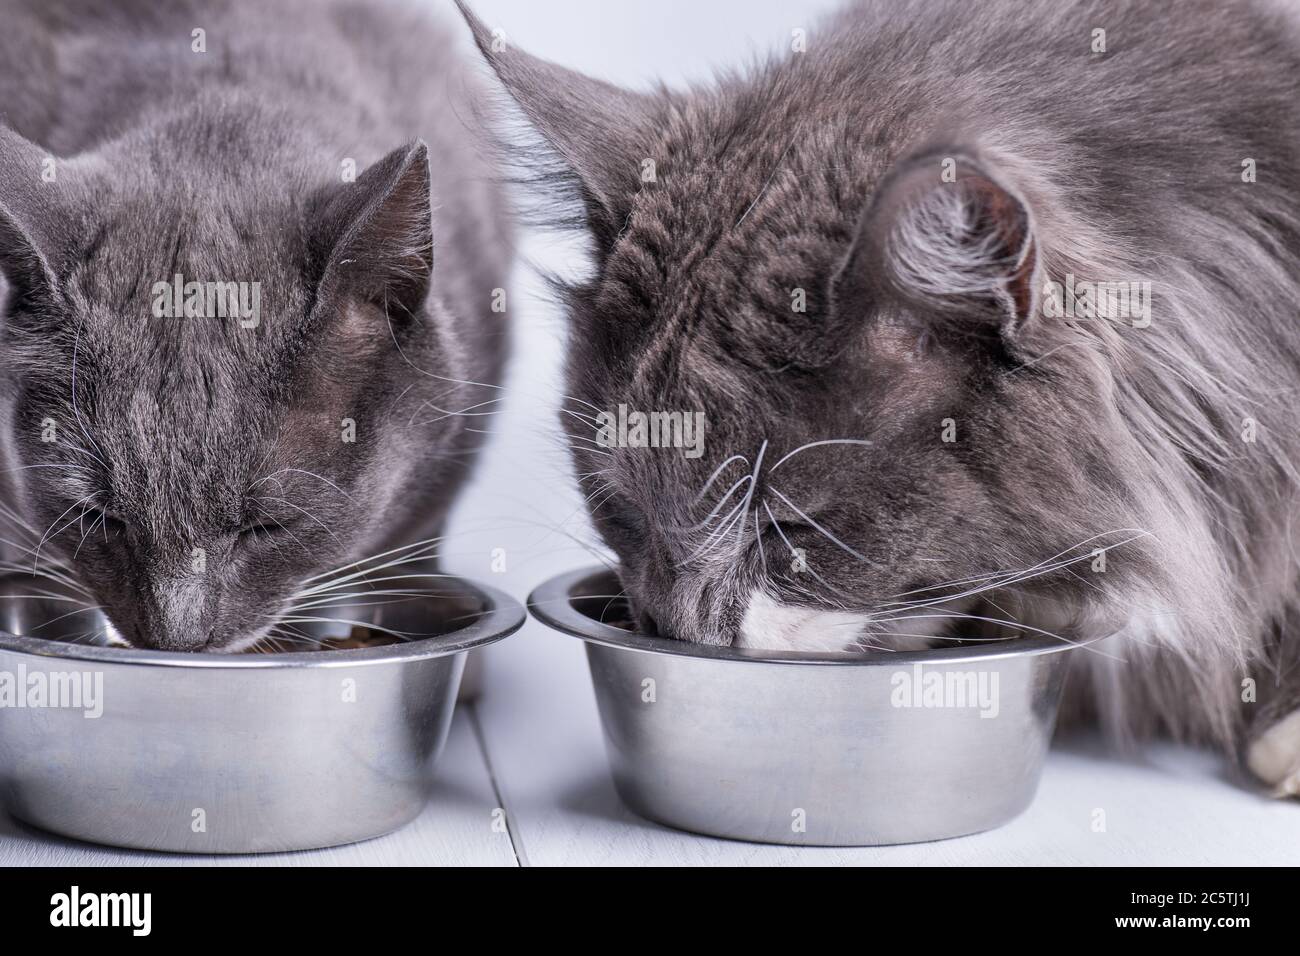 Two gray thoroughbred cats eat cat food from the bowls. Stock Photo